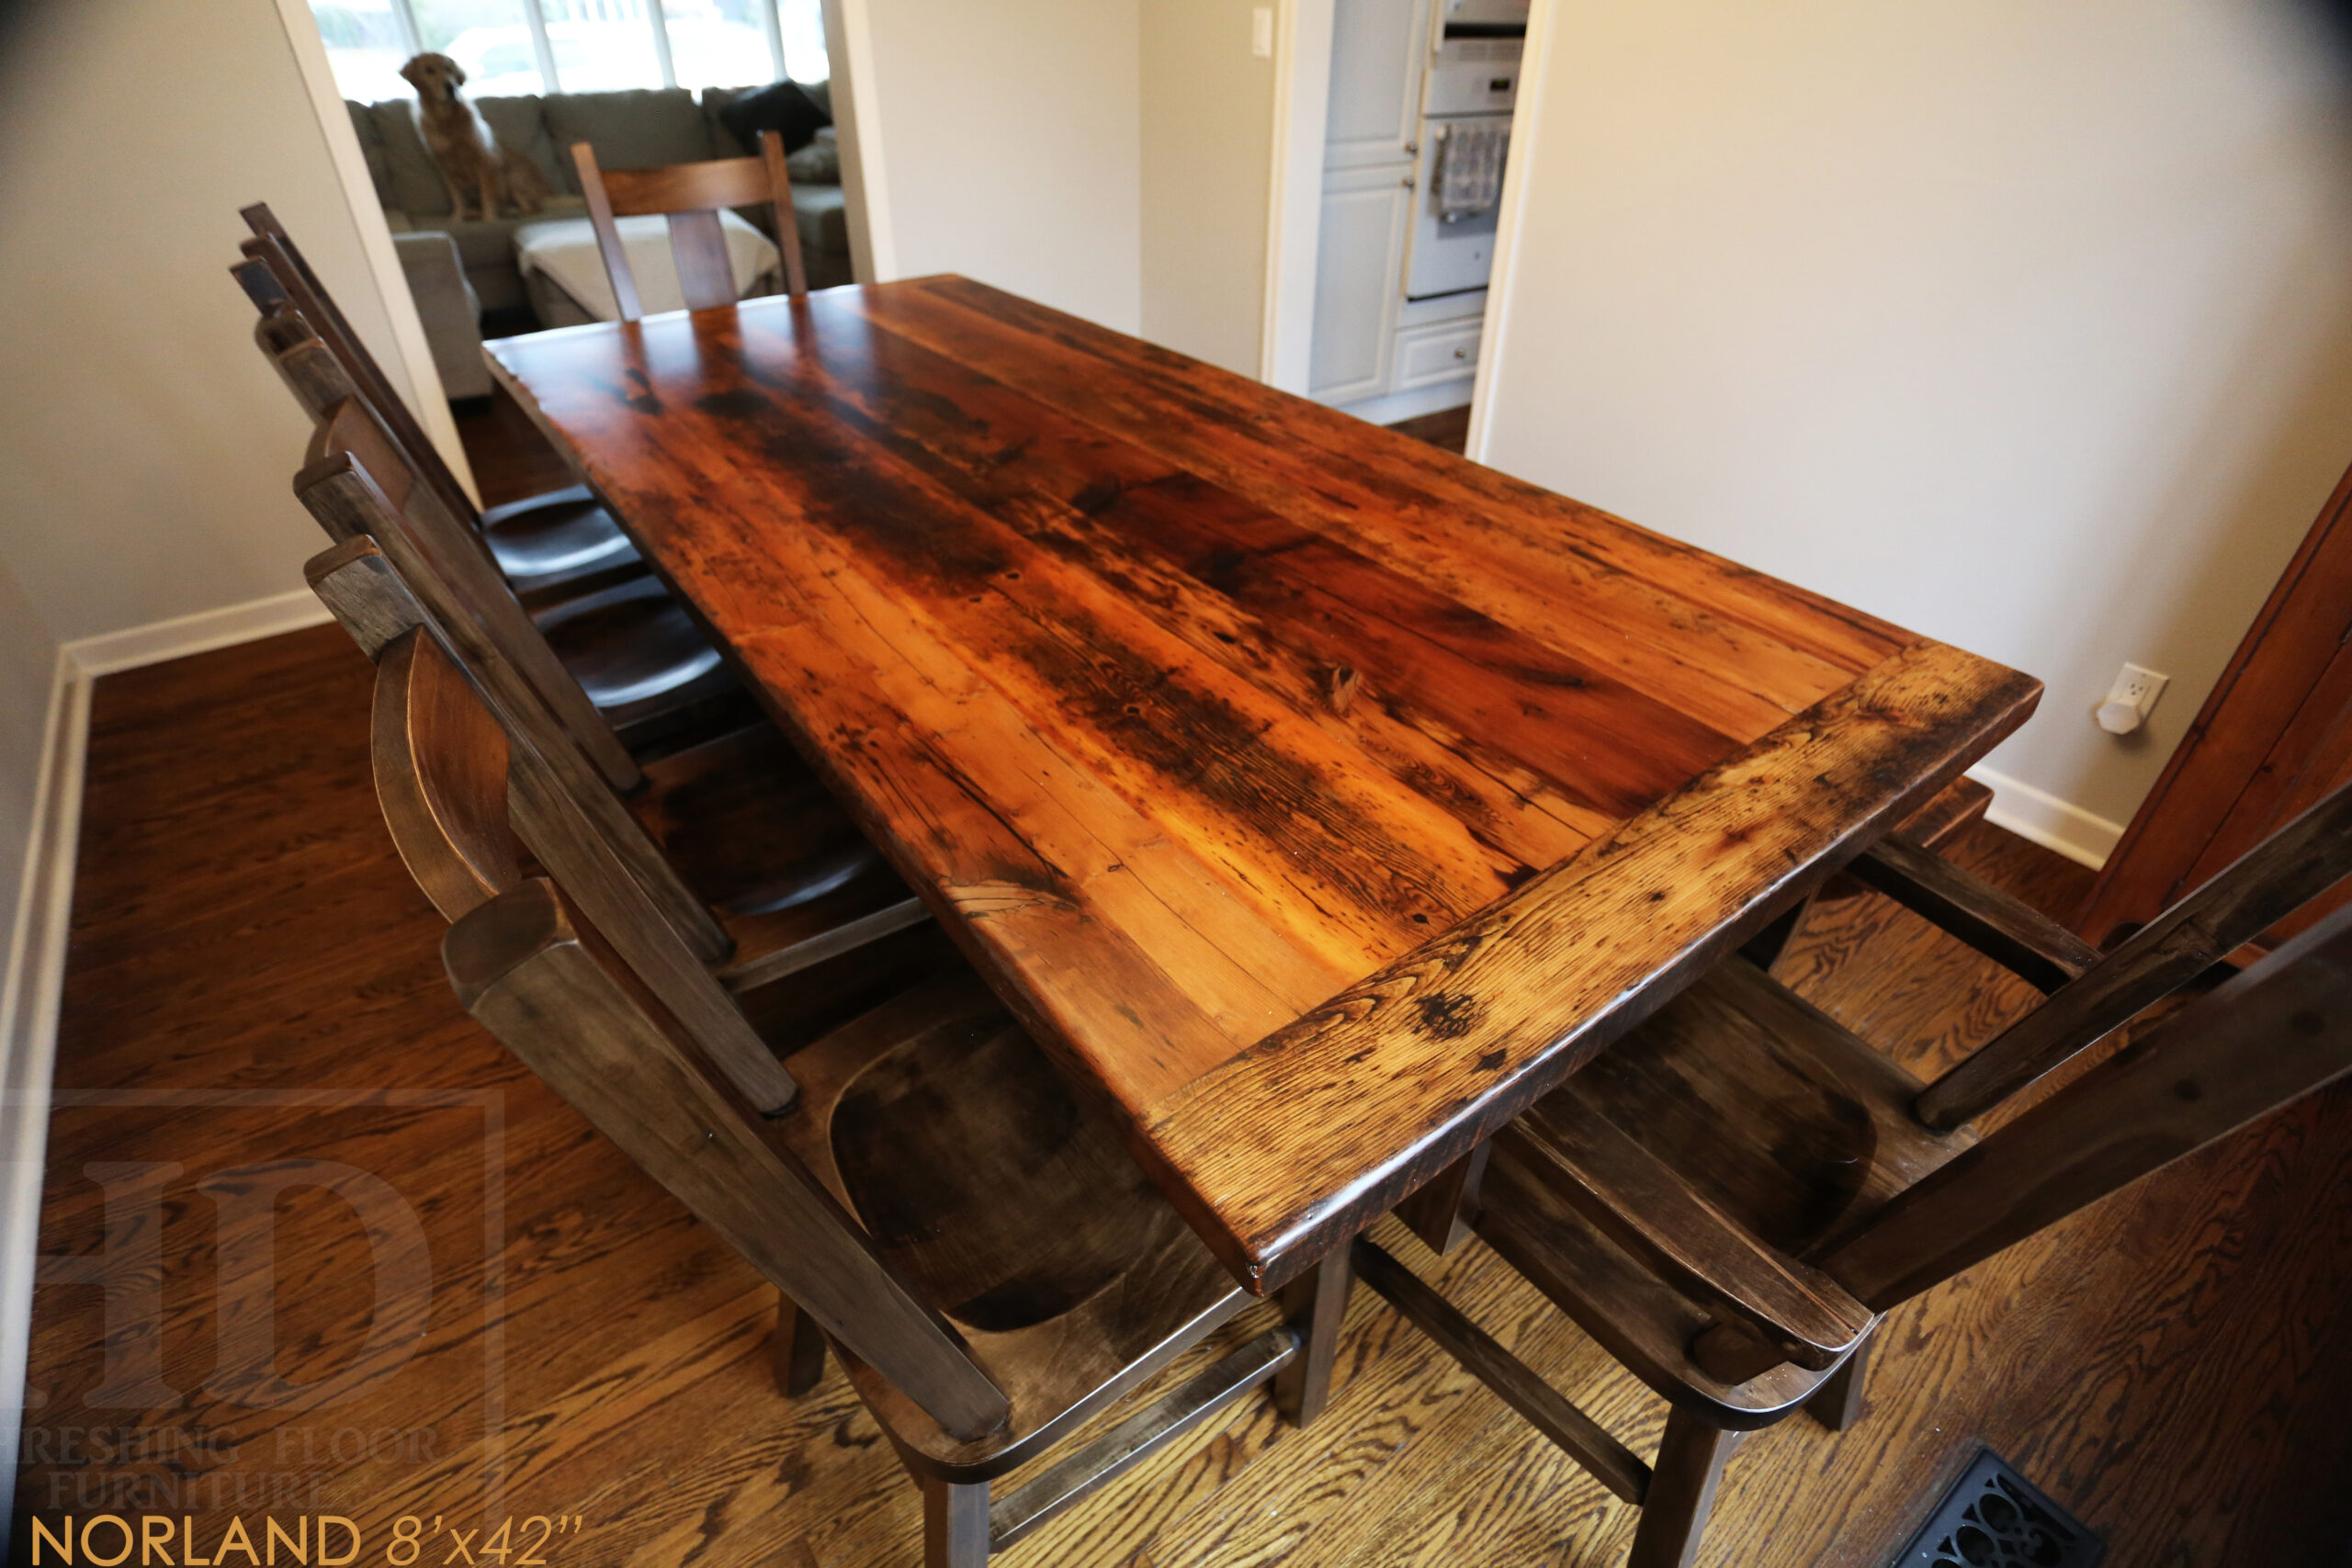 8' Ontario Barnwood Table we made for a Burlington, Ontario home - 42" wide - Sawbuck base - Original edges & distressing maintained - Old growth Hemlock Threshing Floor 2" Top - Premium epoxy + satin polyurethane finish - 8' [matching] bench - 6 Plank Back Chairs / Wormy Maple www.table.ca